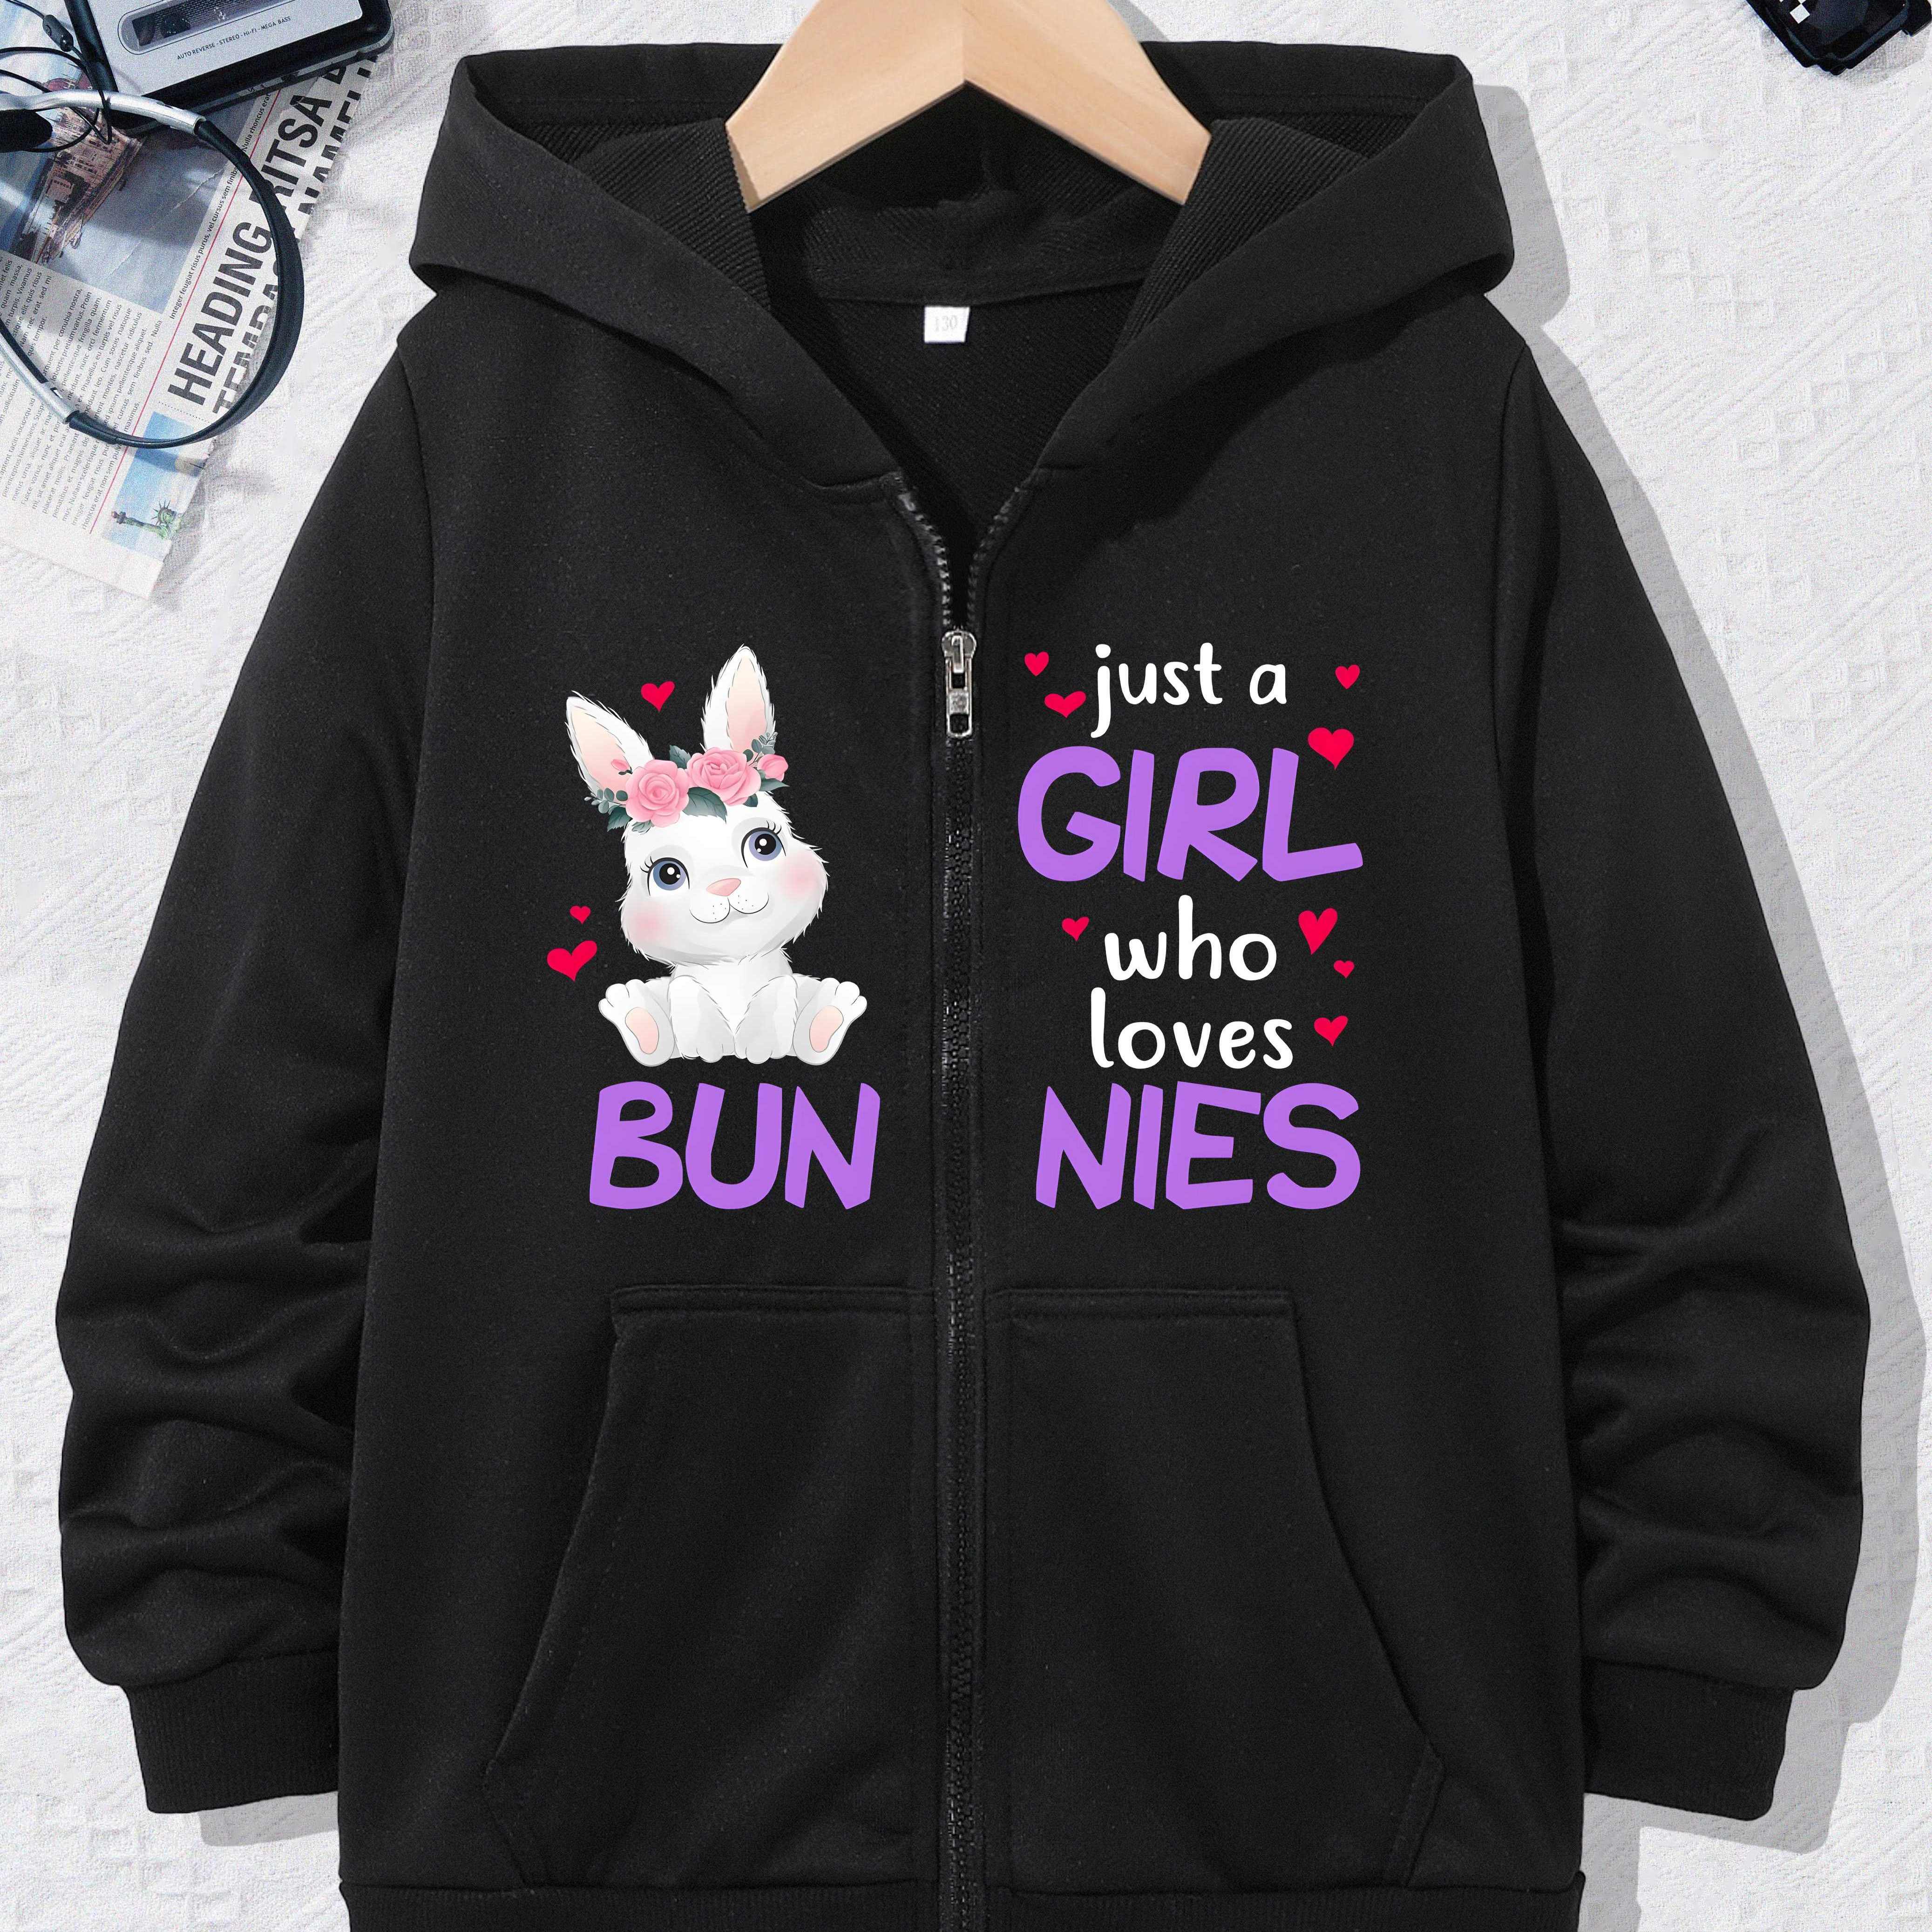 

Just A Girl Who Loves Bunnies Graphic Print, Girls' Casual Hooded Jacket, Long Sleeve Hoodies With Zipper For Fall And Winter